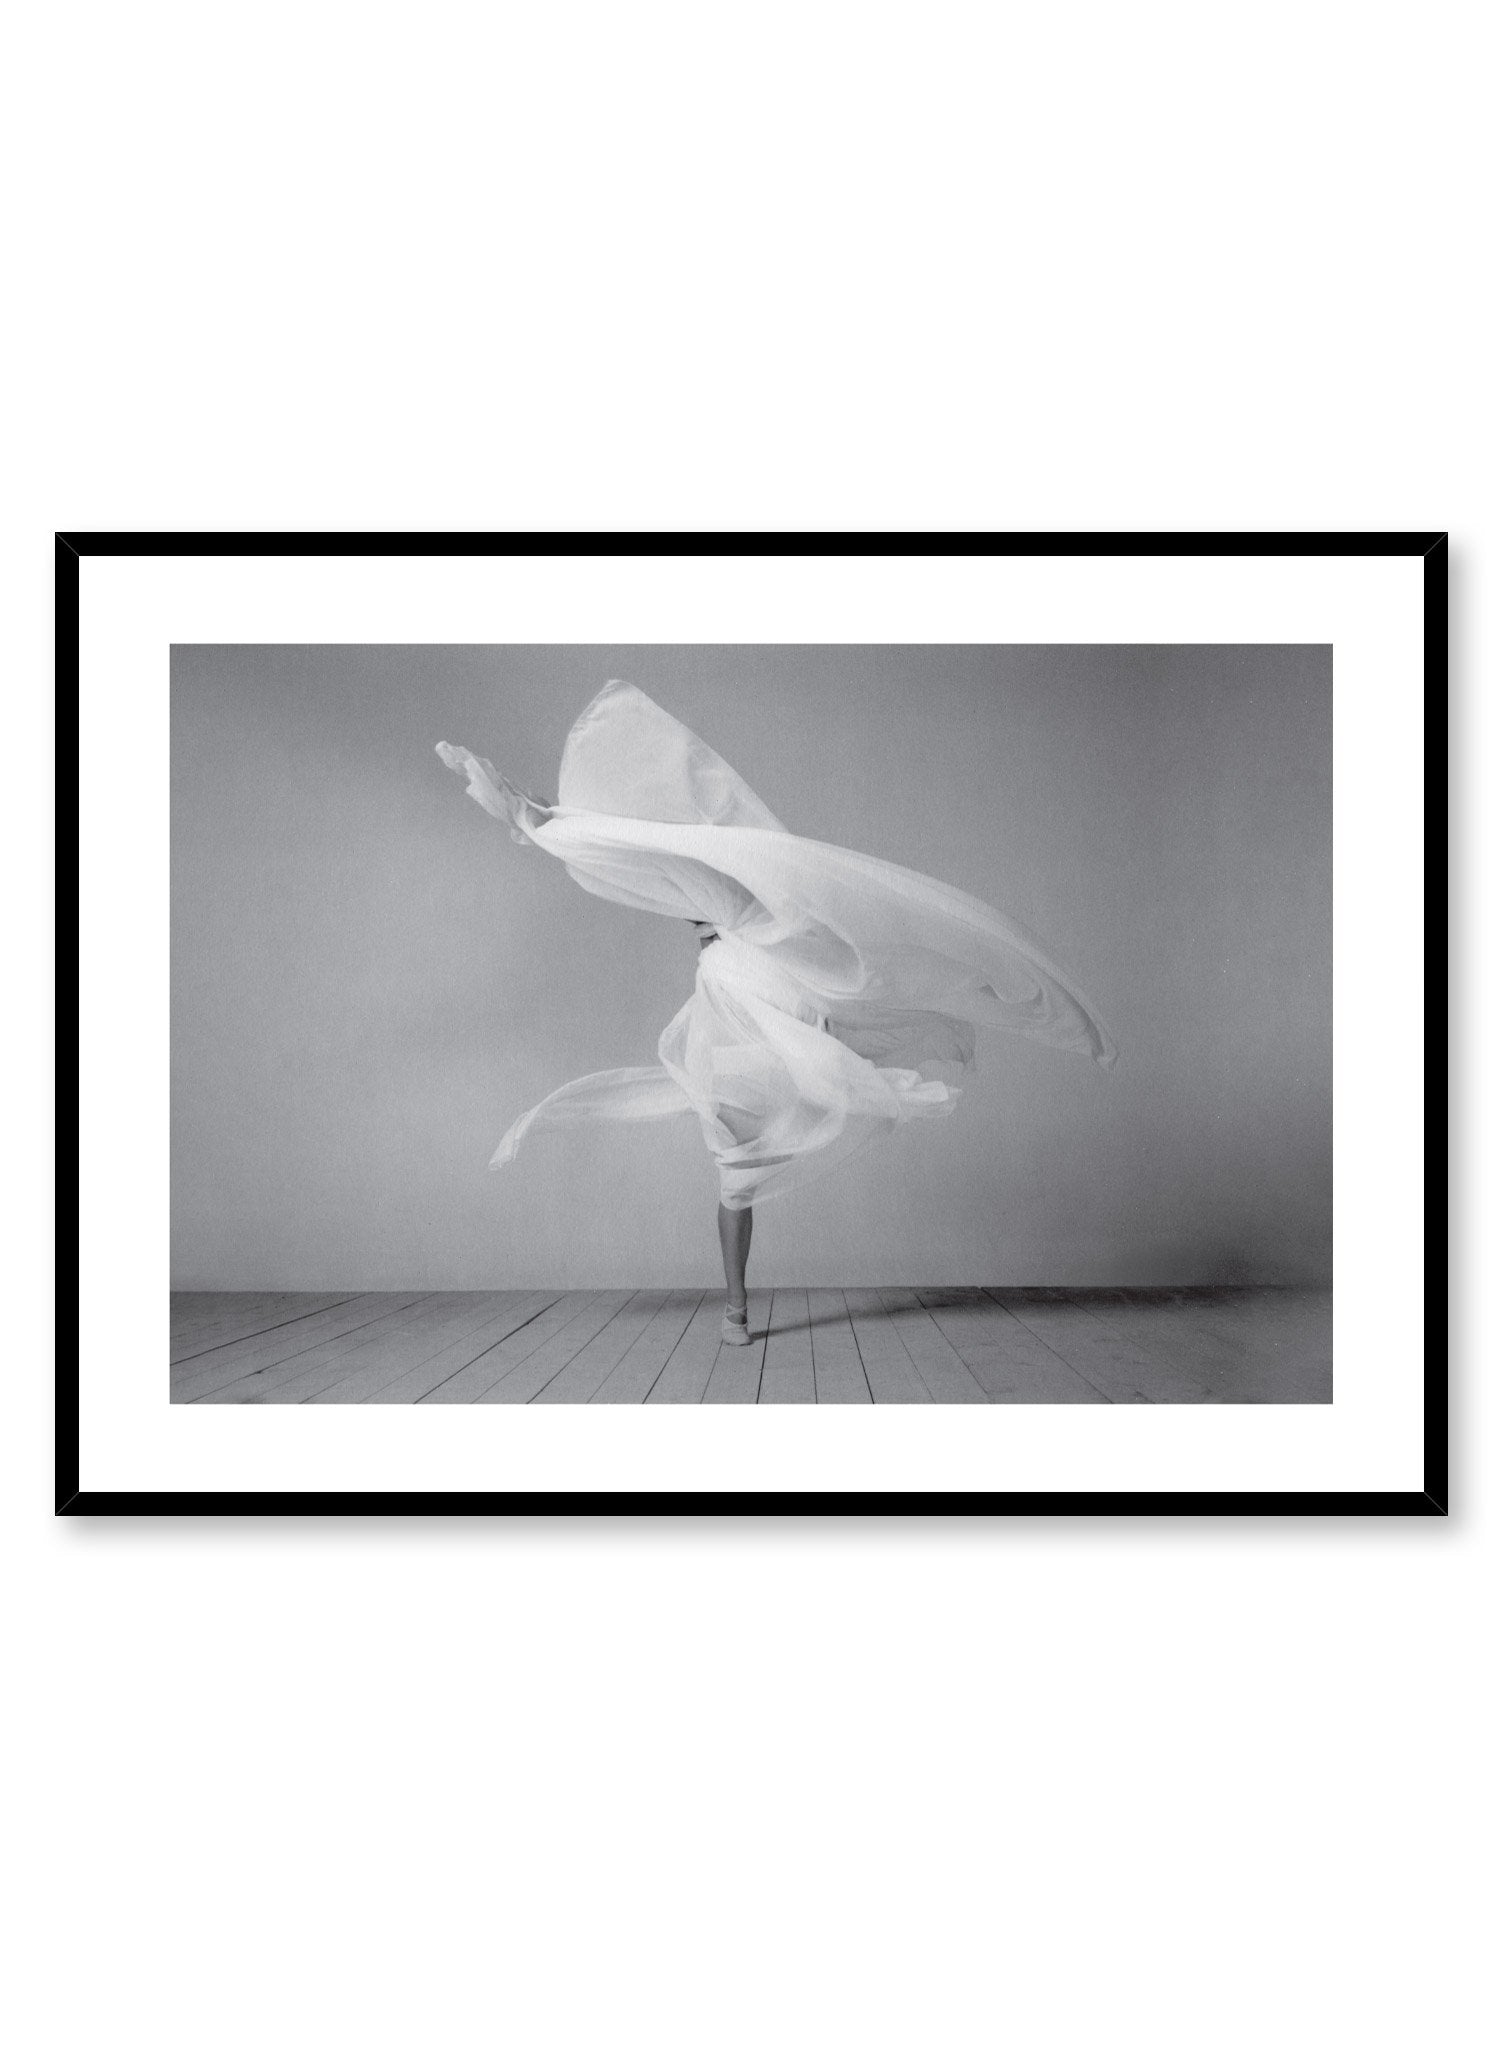 Minimalist design poster by Opposite Wall with fashion photography of Degas dancer in black and white